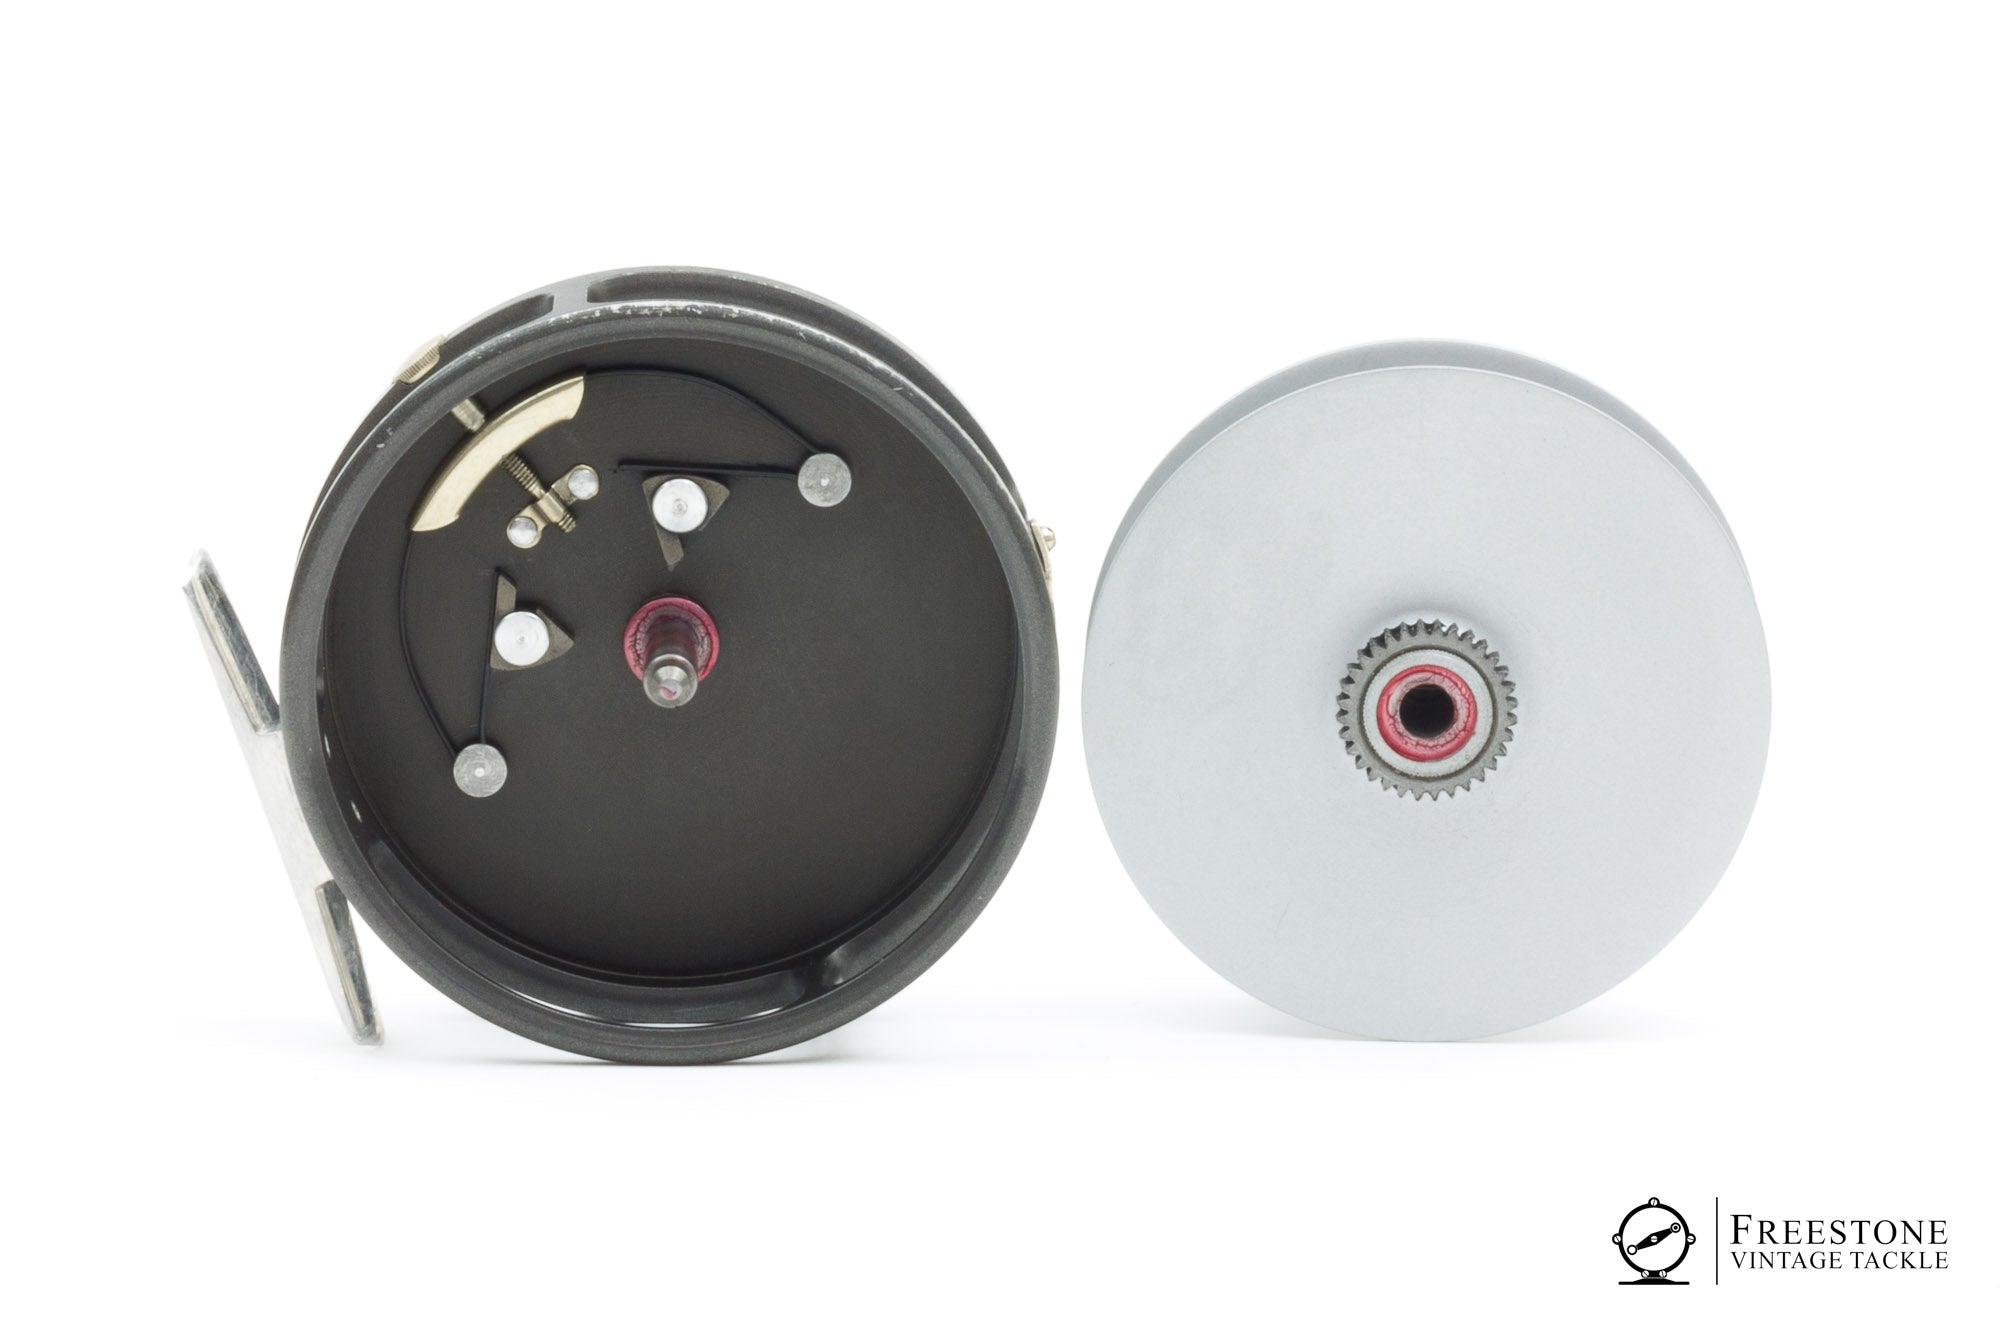 HARDY TROUT FLY fishing reel check pawl Clicker marquis orvis cfo princess  LRH £6.99 - PicClick UK